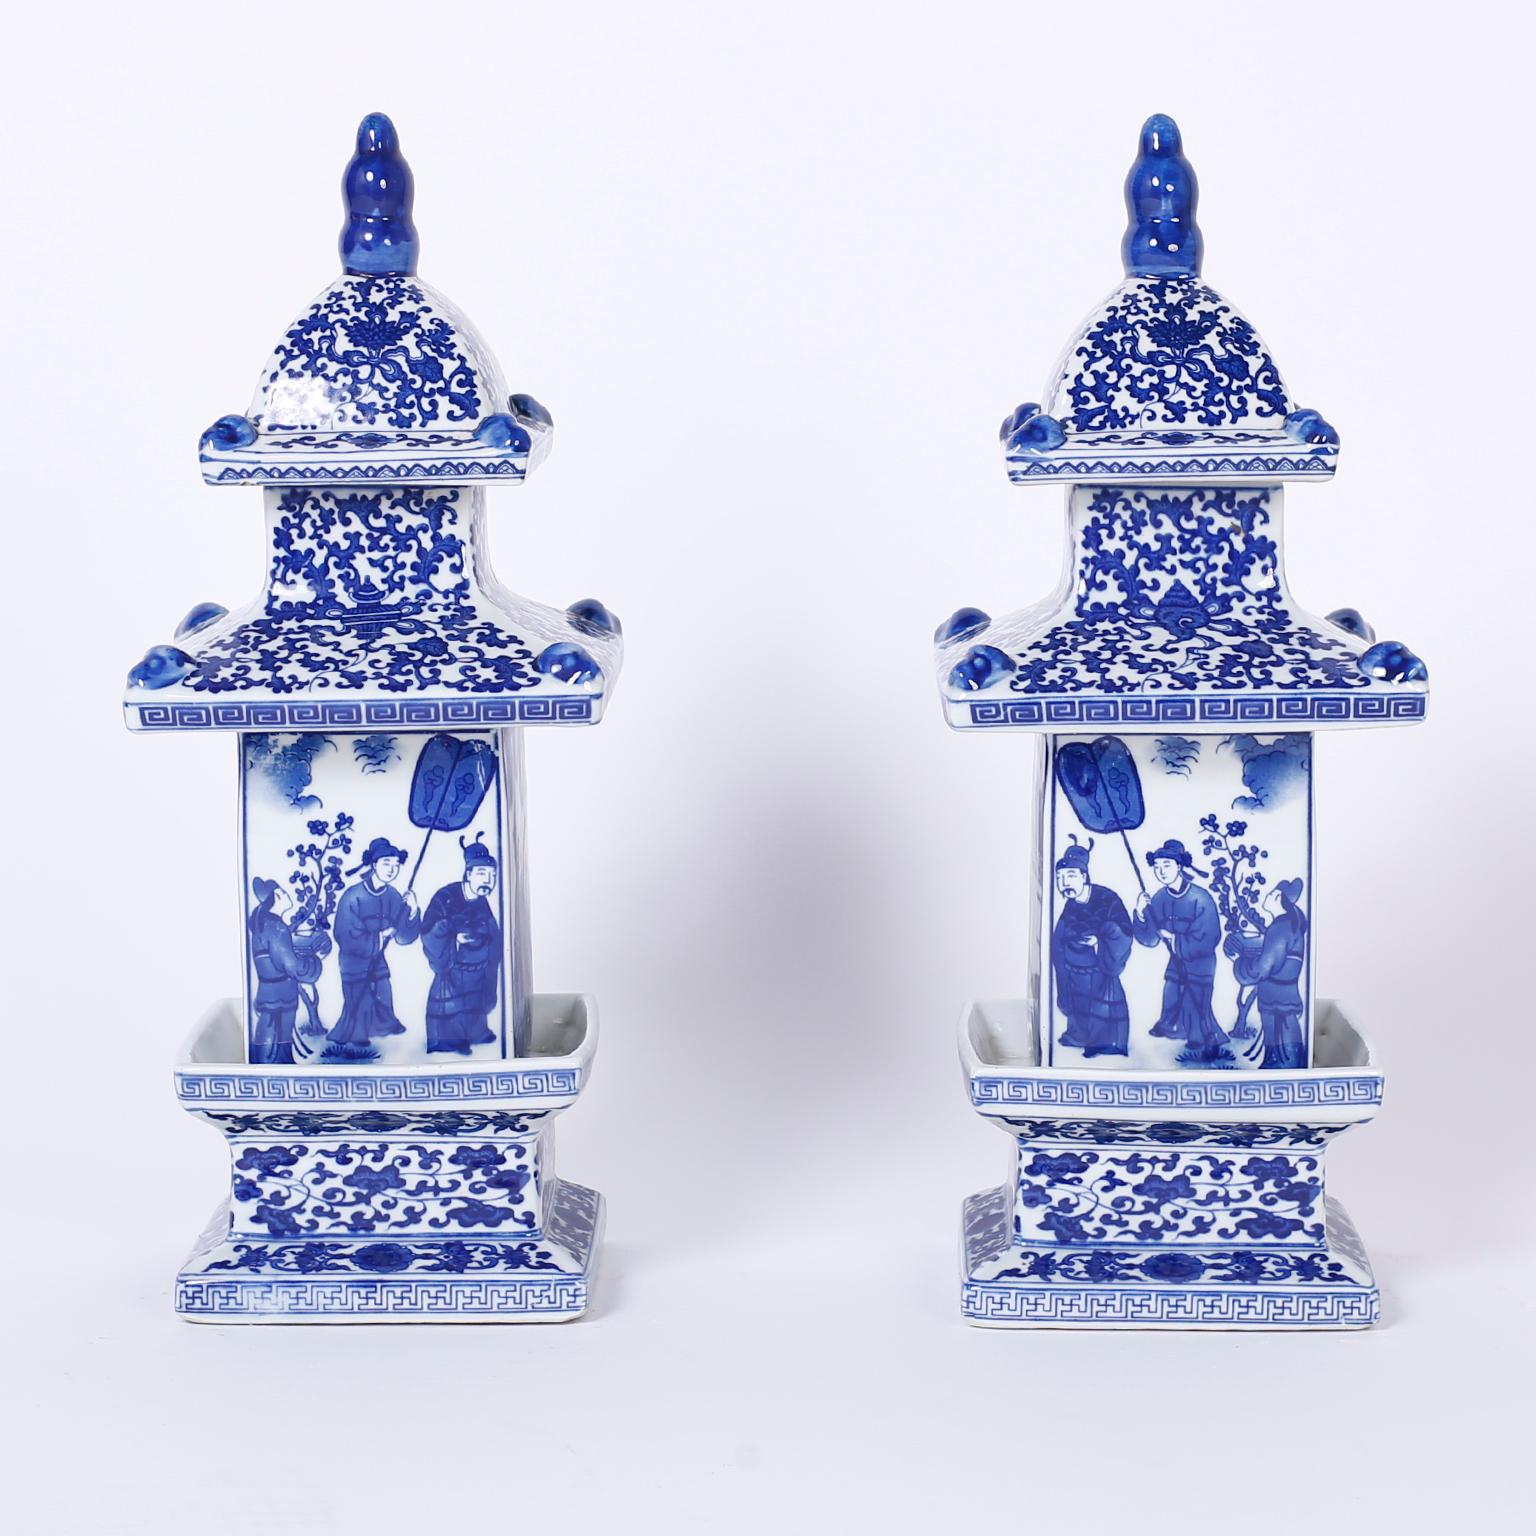 Collecting  Chinese blue and white porcelain layered tower pagoda Vases RN 